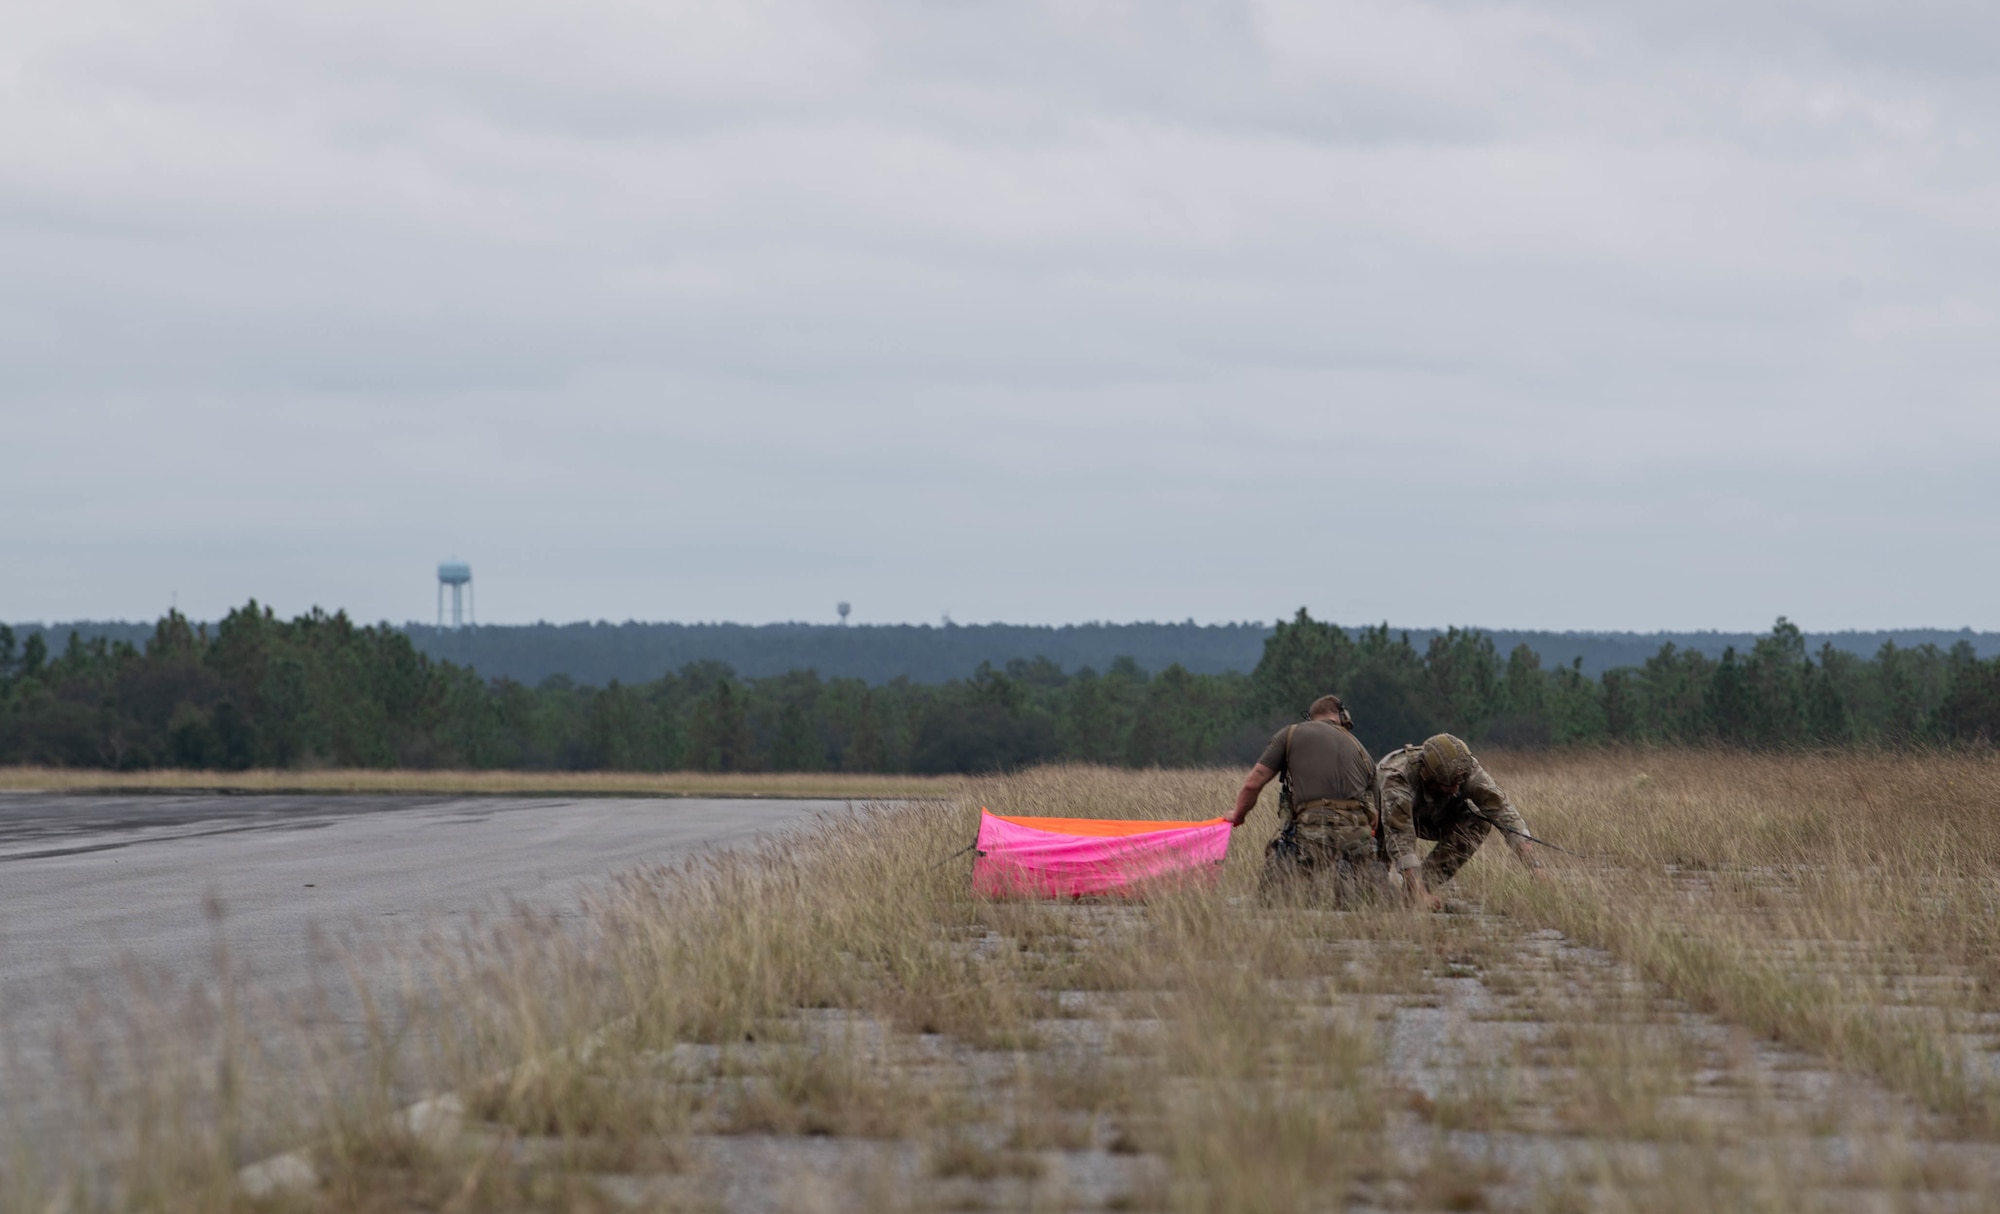 Two Special Tactics operators set up a bright pink panel beside the road in the distance to help aircraft locate the landing area.